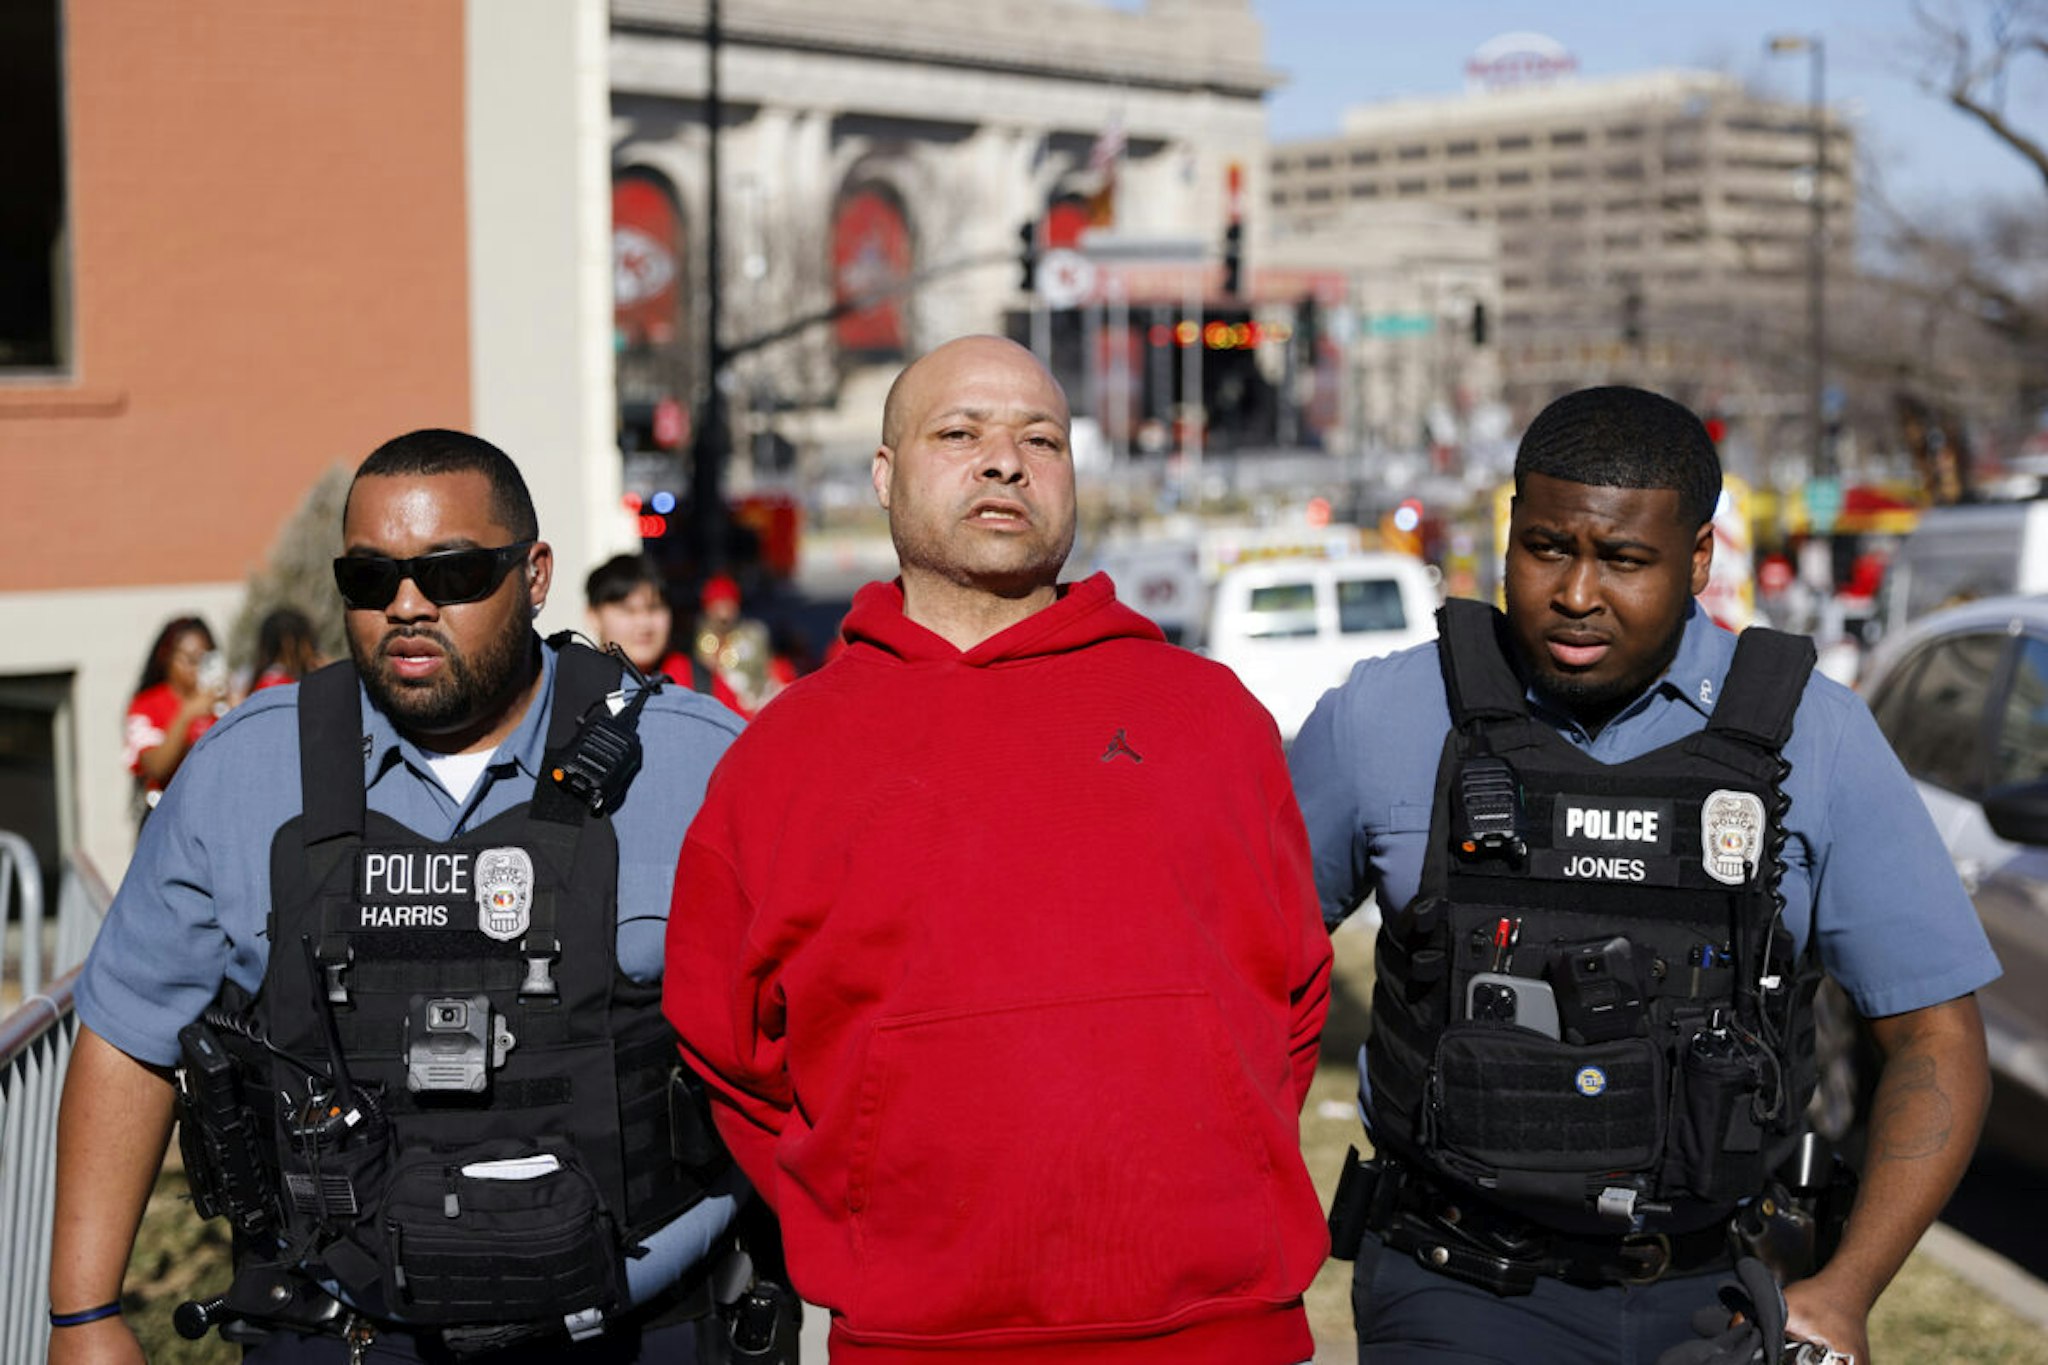 KANSAS CITY, MISSOURI - FEBRUARY 14: A man is detained by law enforcement following a shooting at Union Station during the Kansas City Chiefs Super Bowl LVIII victory parade on February 14, 2024 in Kansas City, Missouri. Several people were shot and two people were detained after a rally celebrating the Chiefs Super Bowl victory.